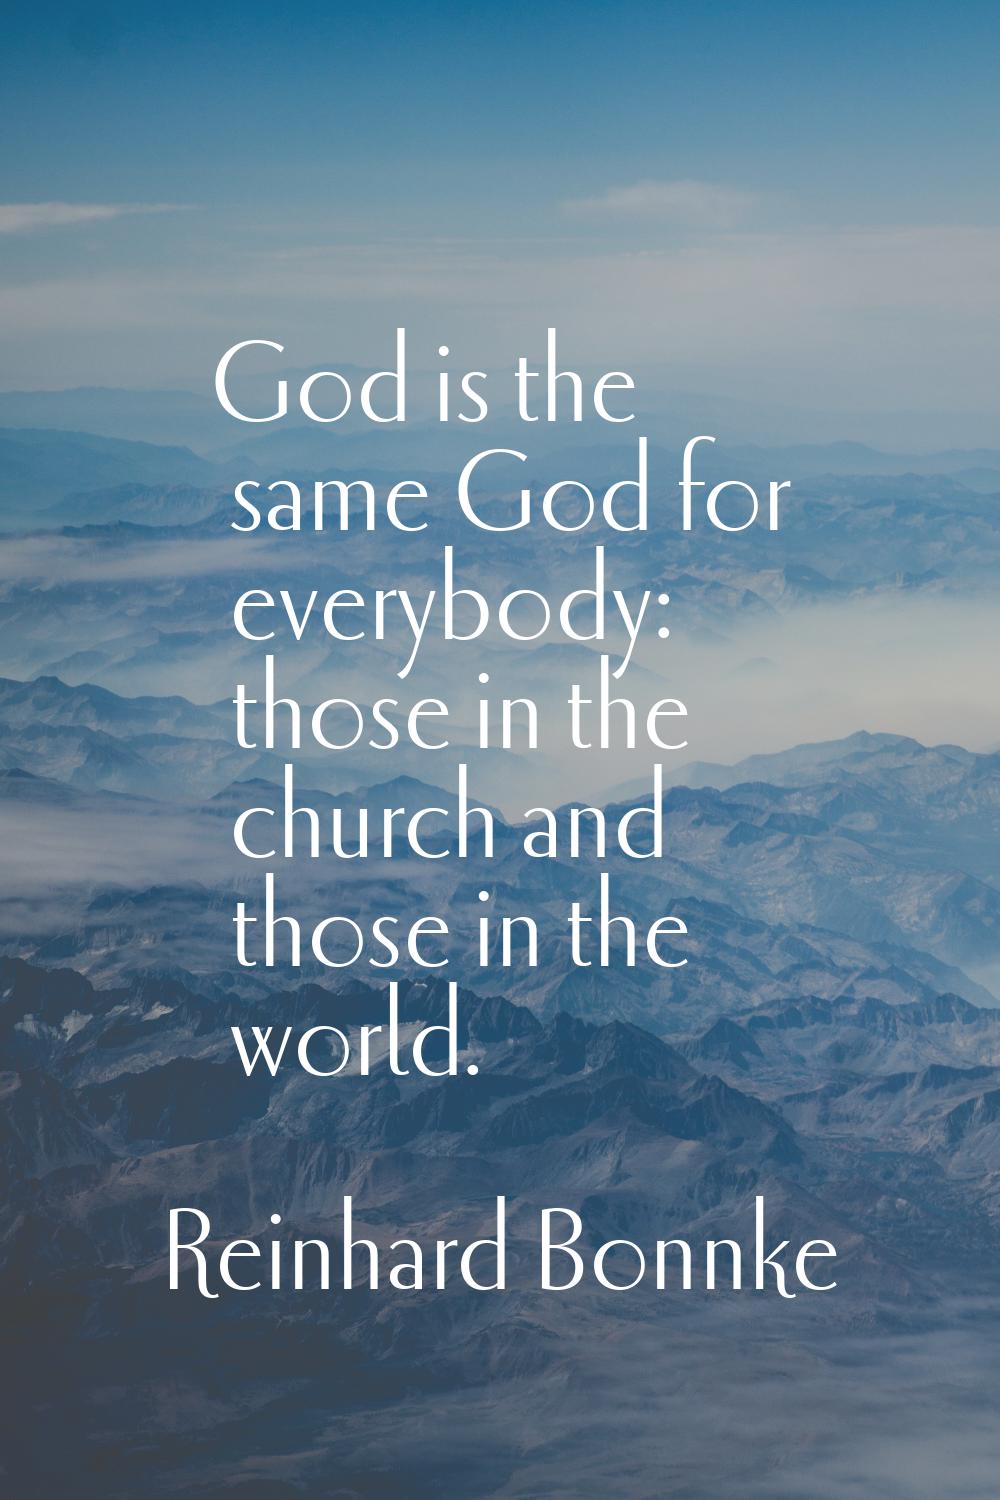 God is the same God for everybody: those in the church and those in the world.